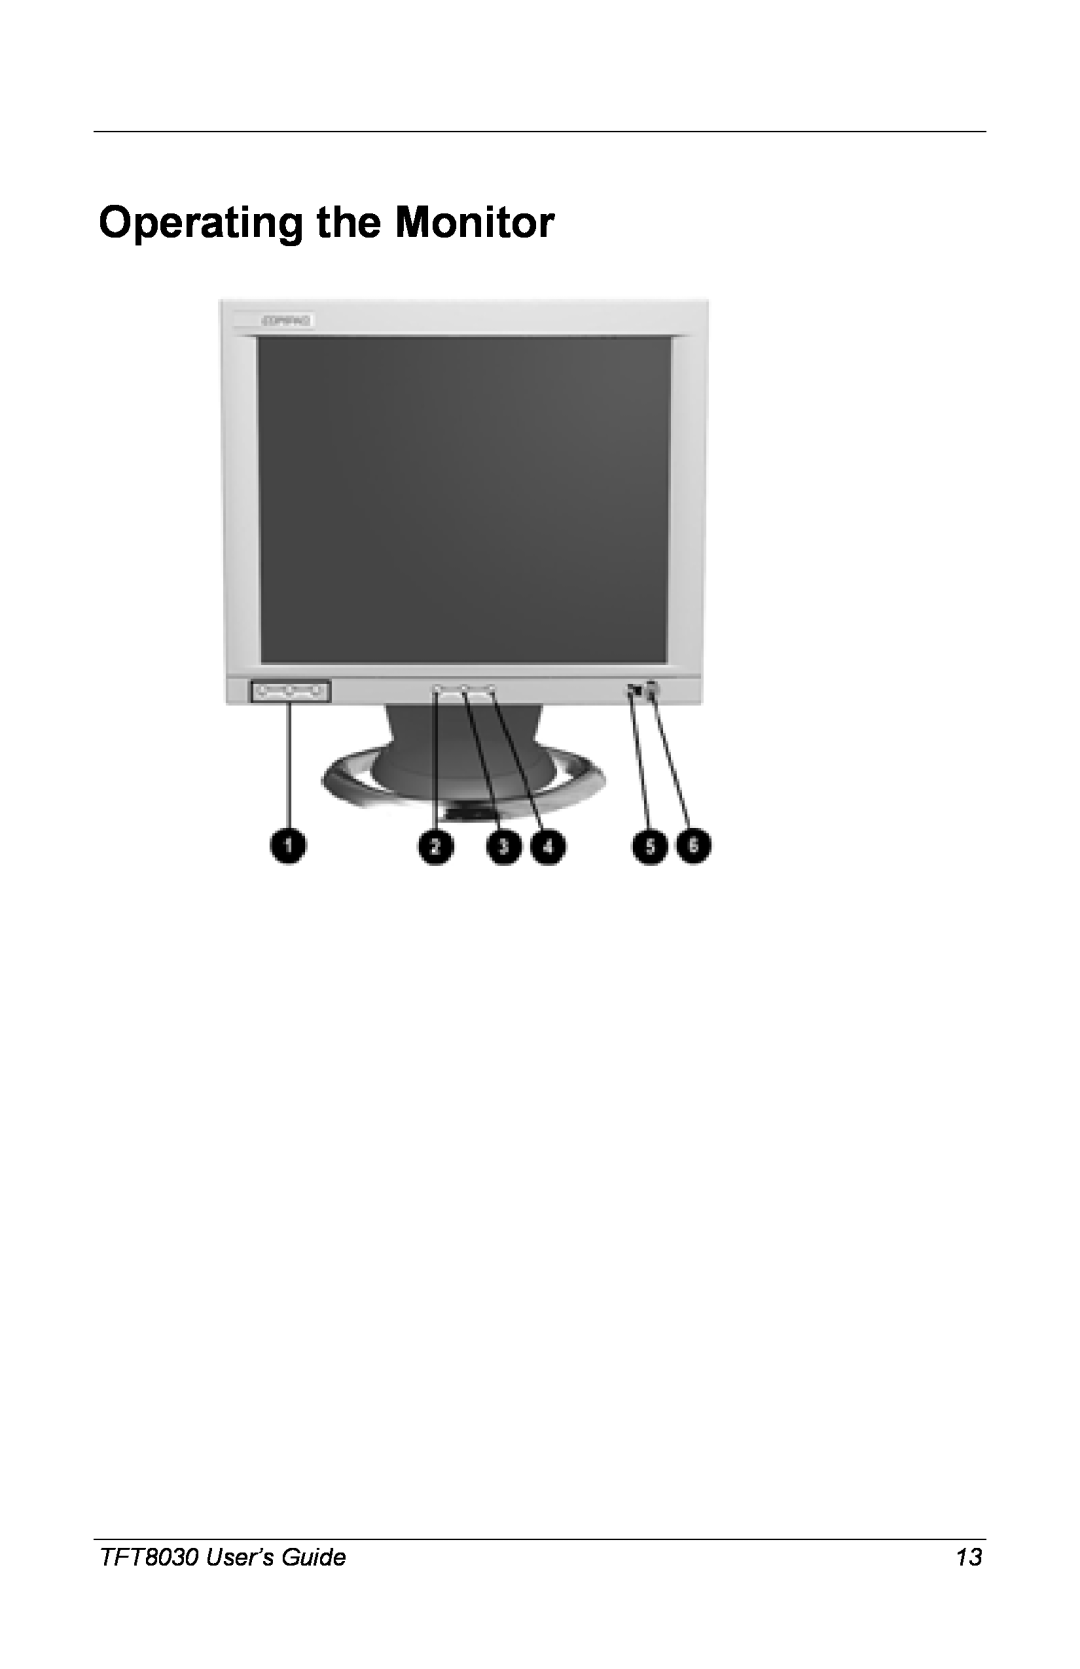 Compaq manual Operating the Monitor, TFT8030 User’s Guide 